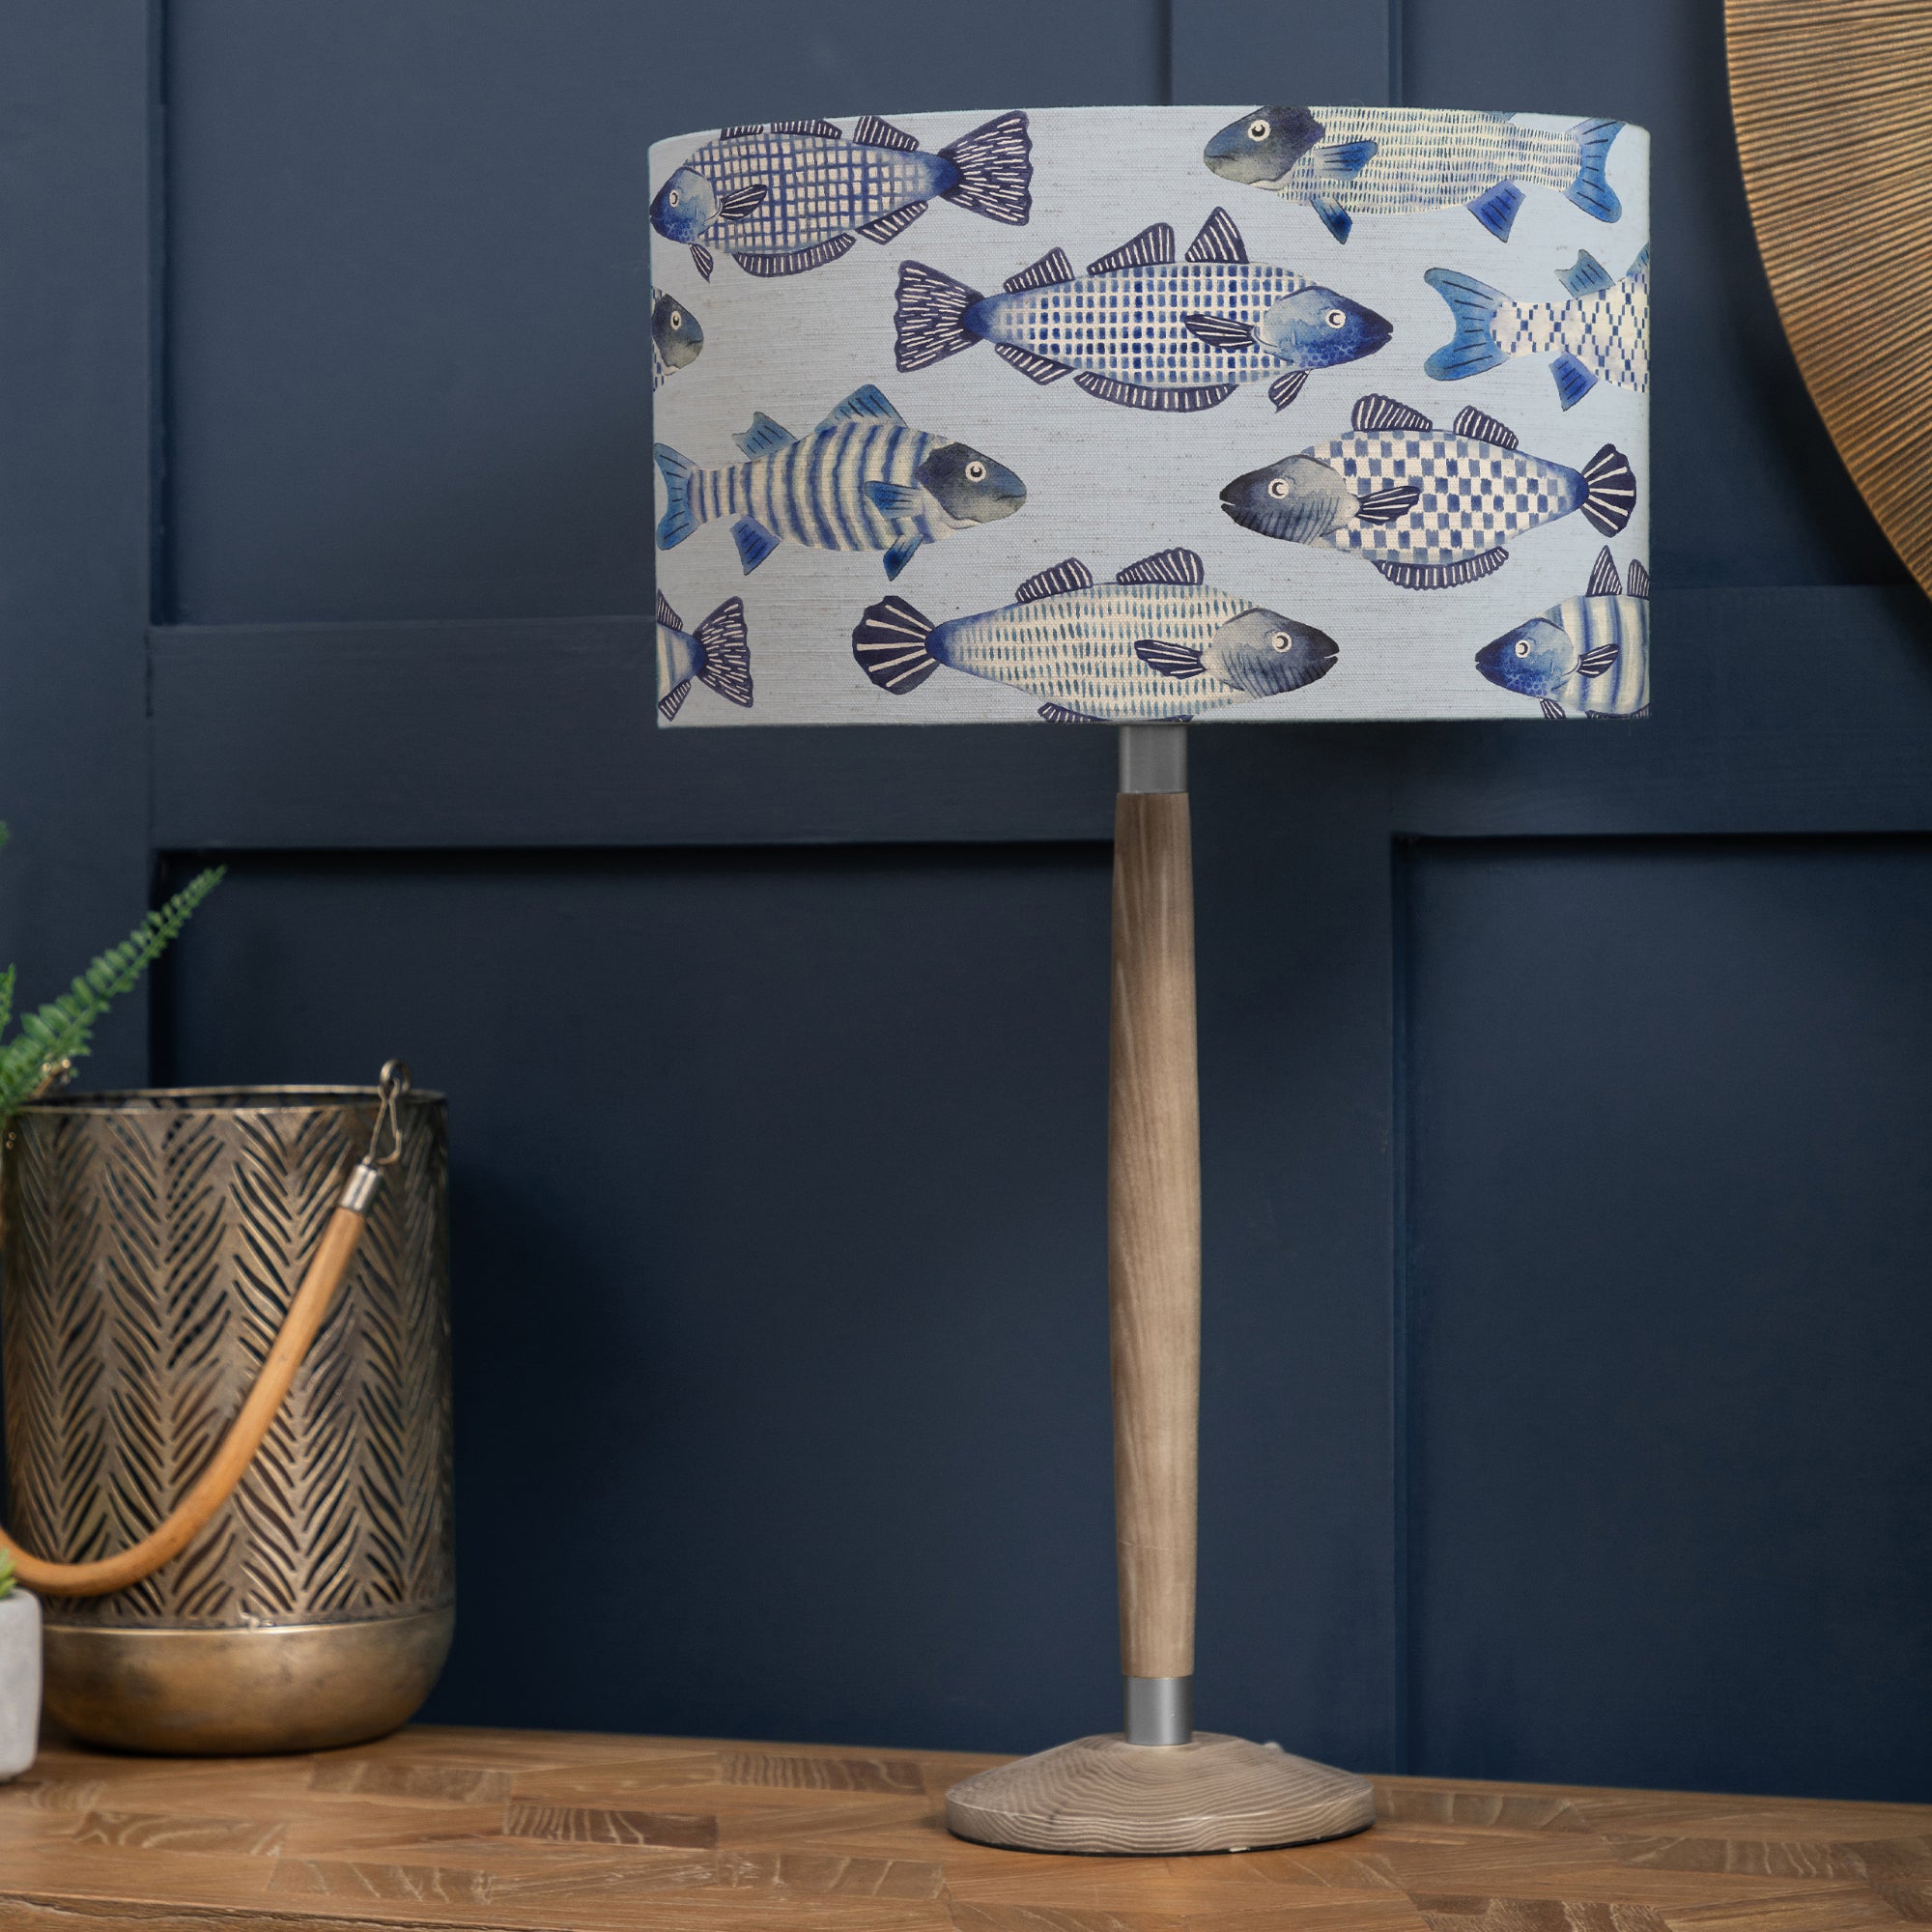 Solensis Table Lamp with Cove Shade Cobalt Blue